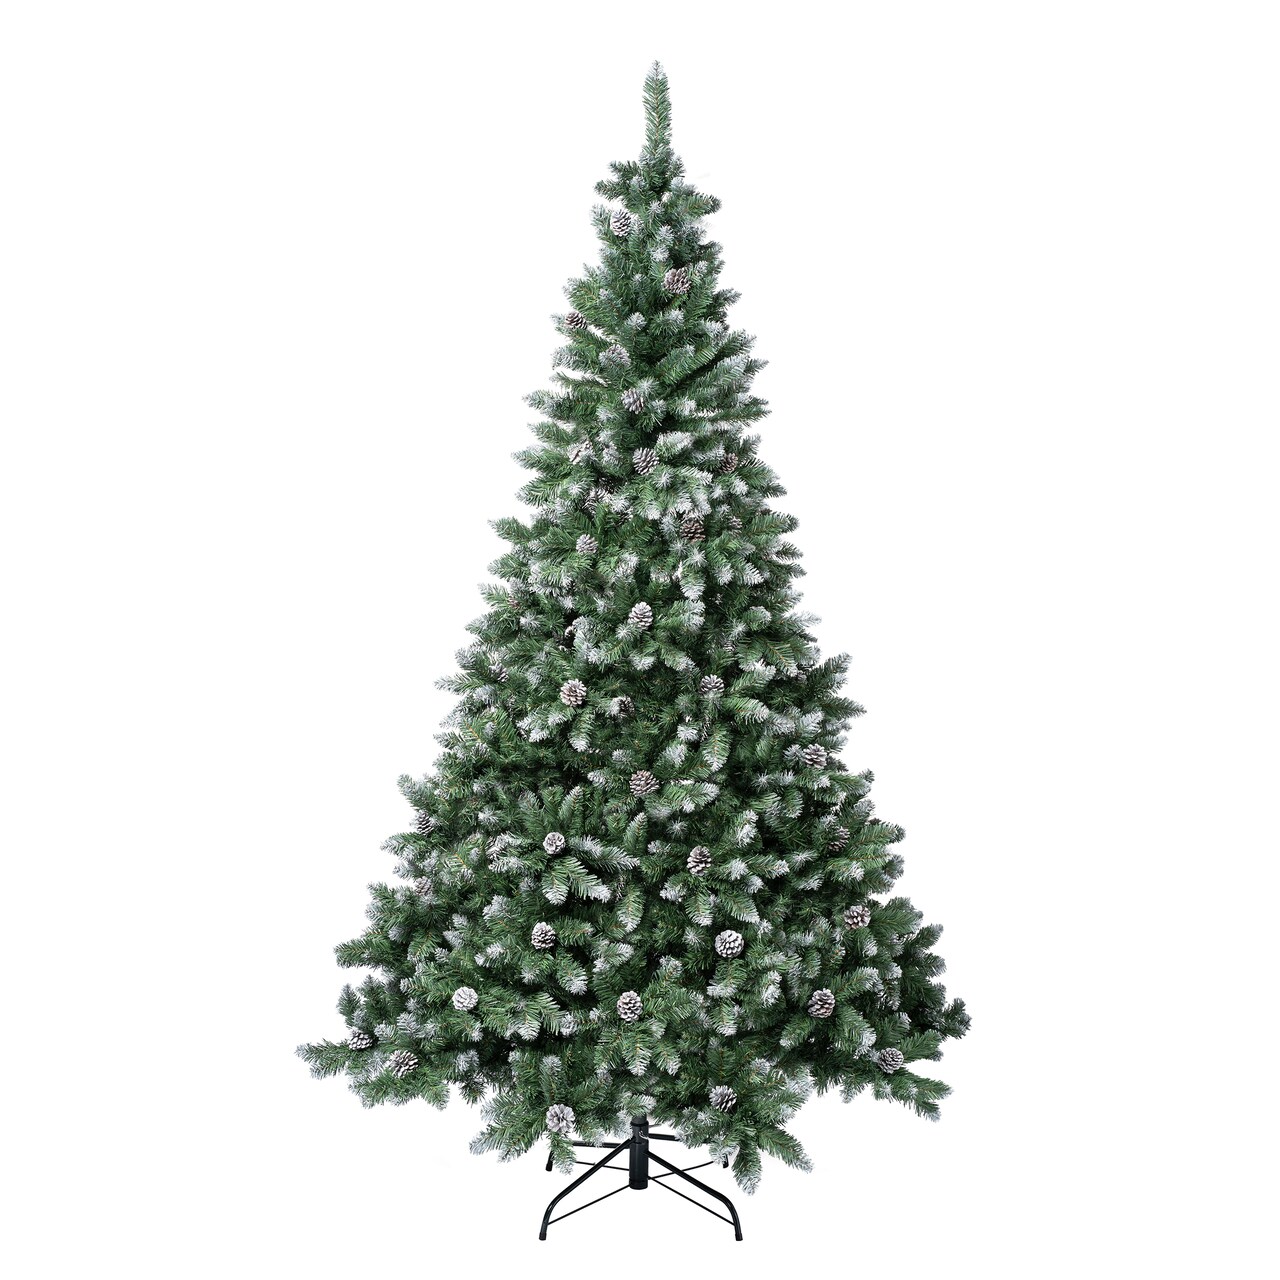 National Tree Company First Traditions Oakley Hills Snowy Christmas Tree with Hinged Branches, 6 ft